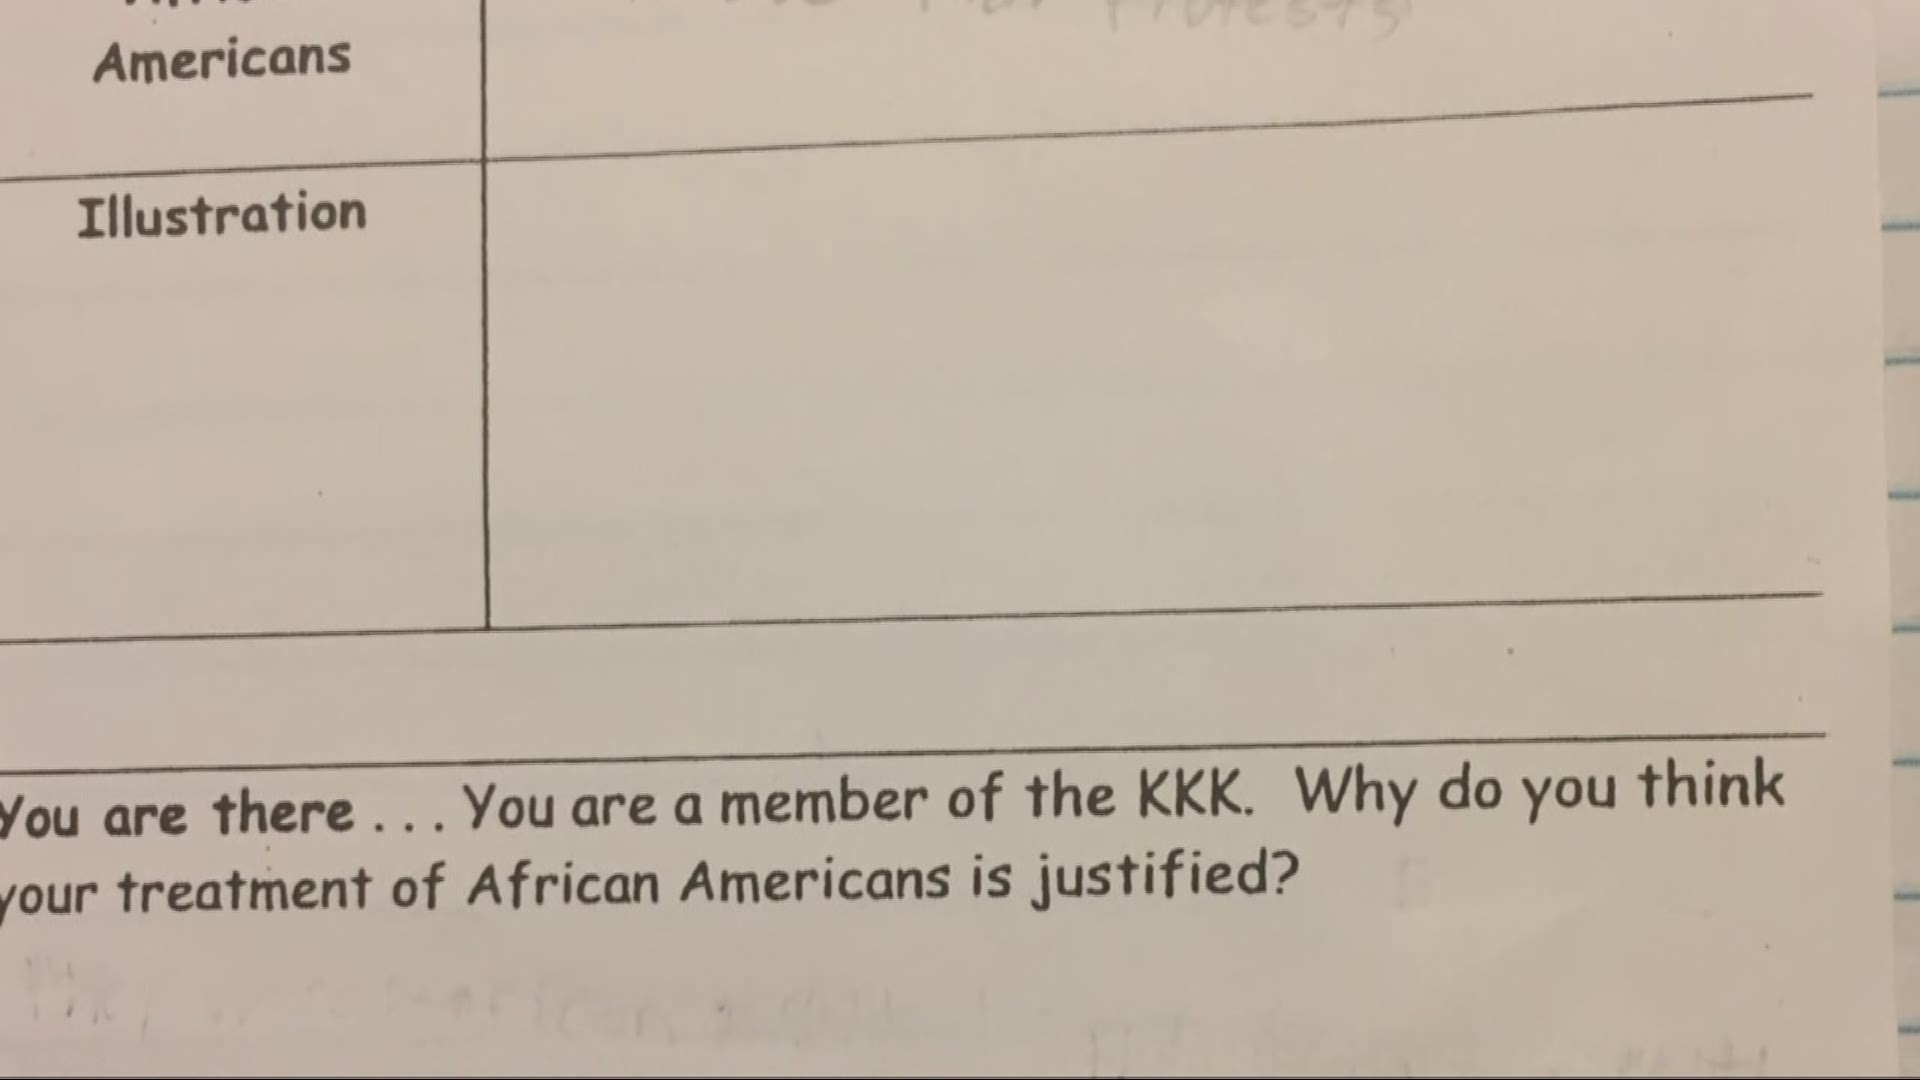 A 5th-grade homework assignment is getting national attention because it asked students to justify the actions of the KKK.